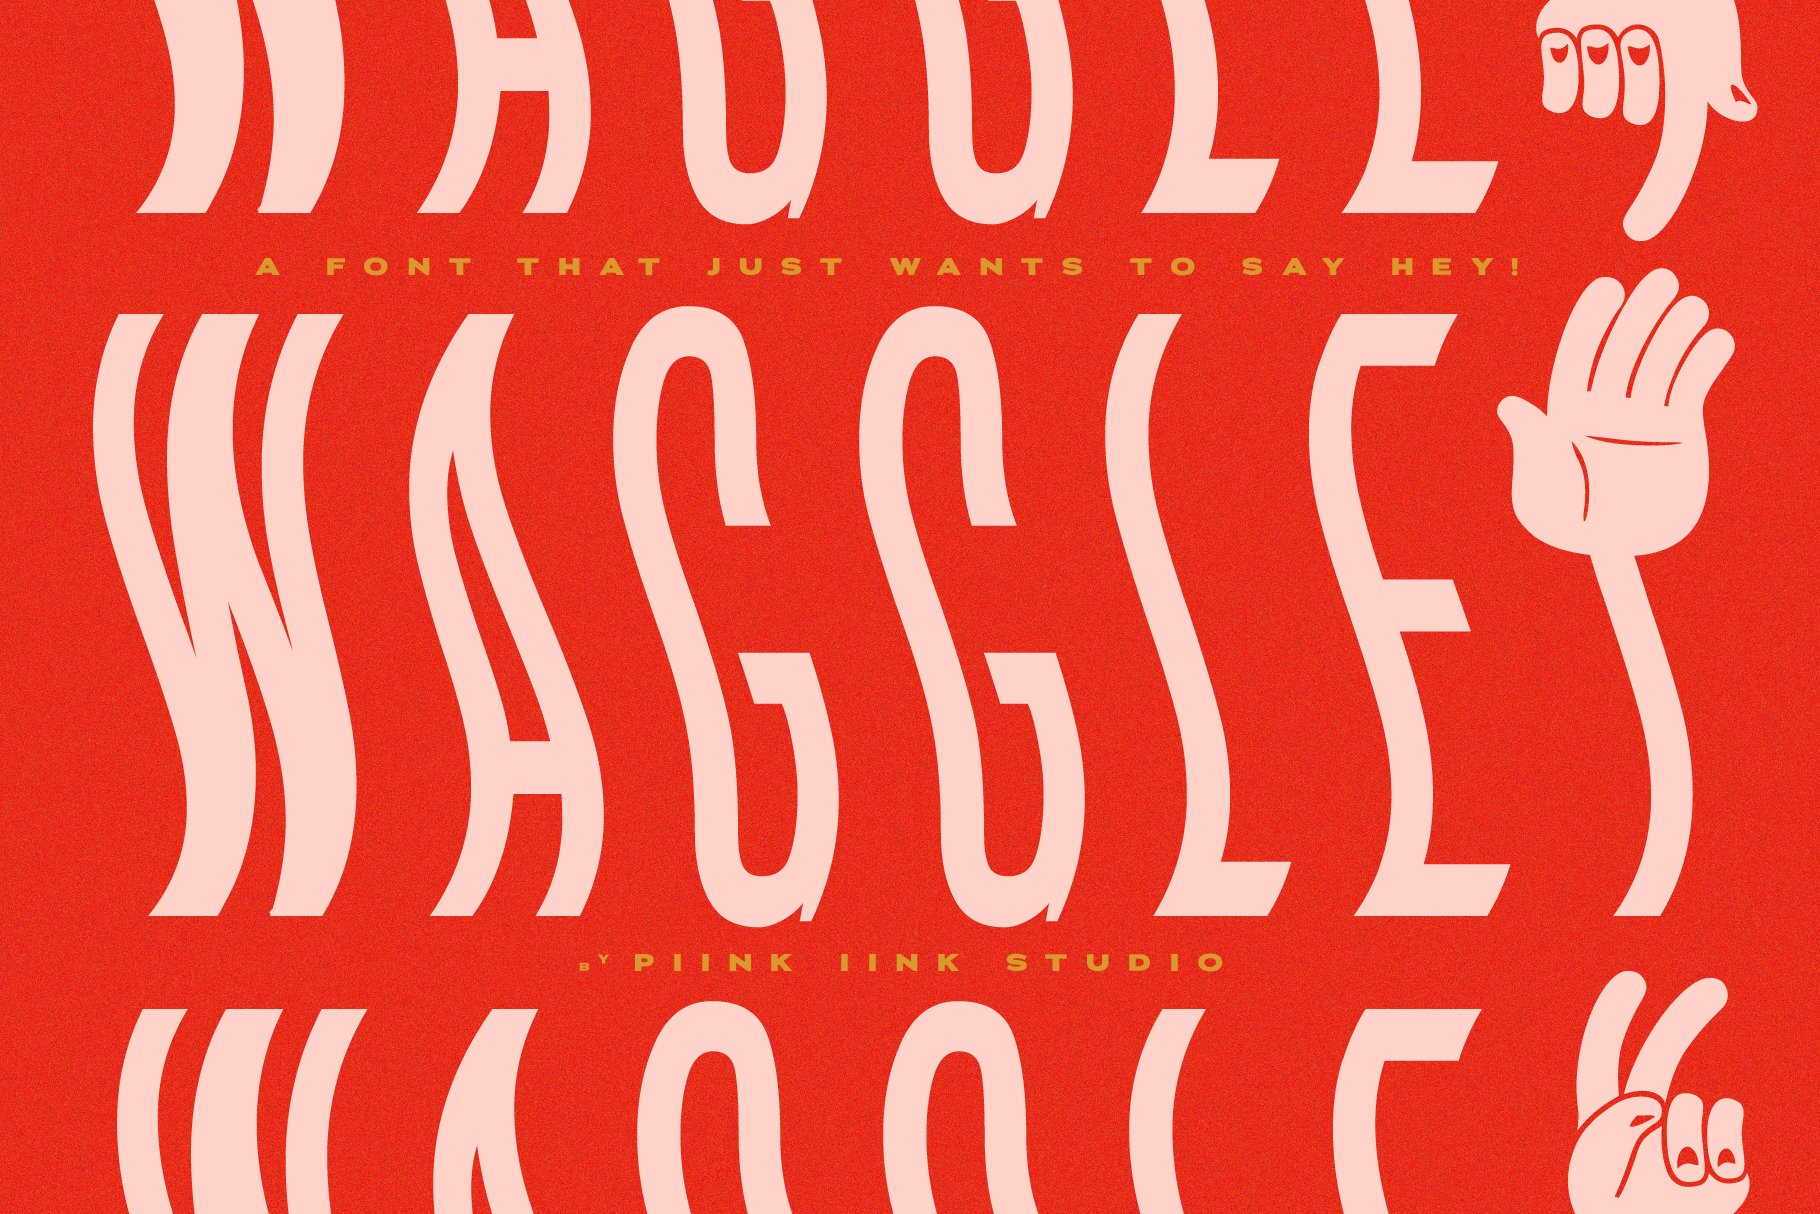 WAGGLE Display Font cover image.